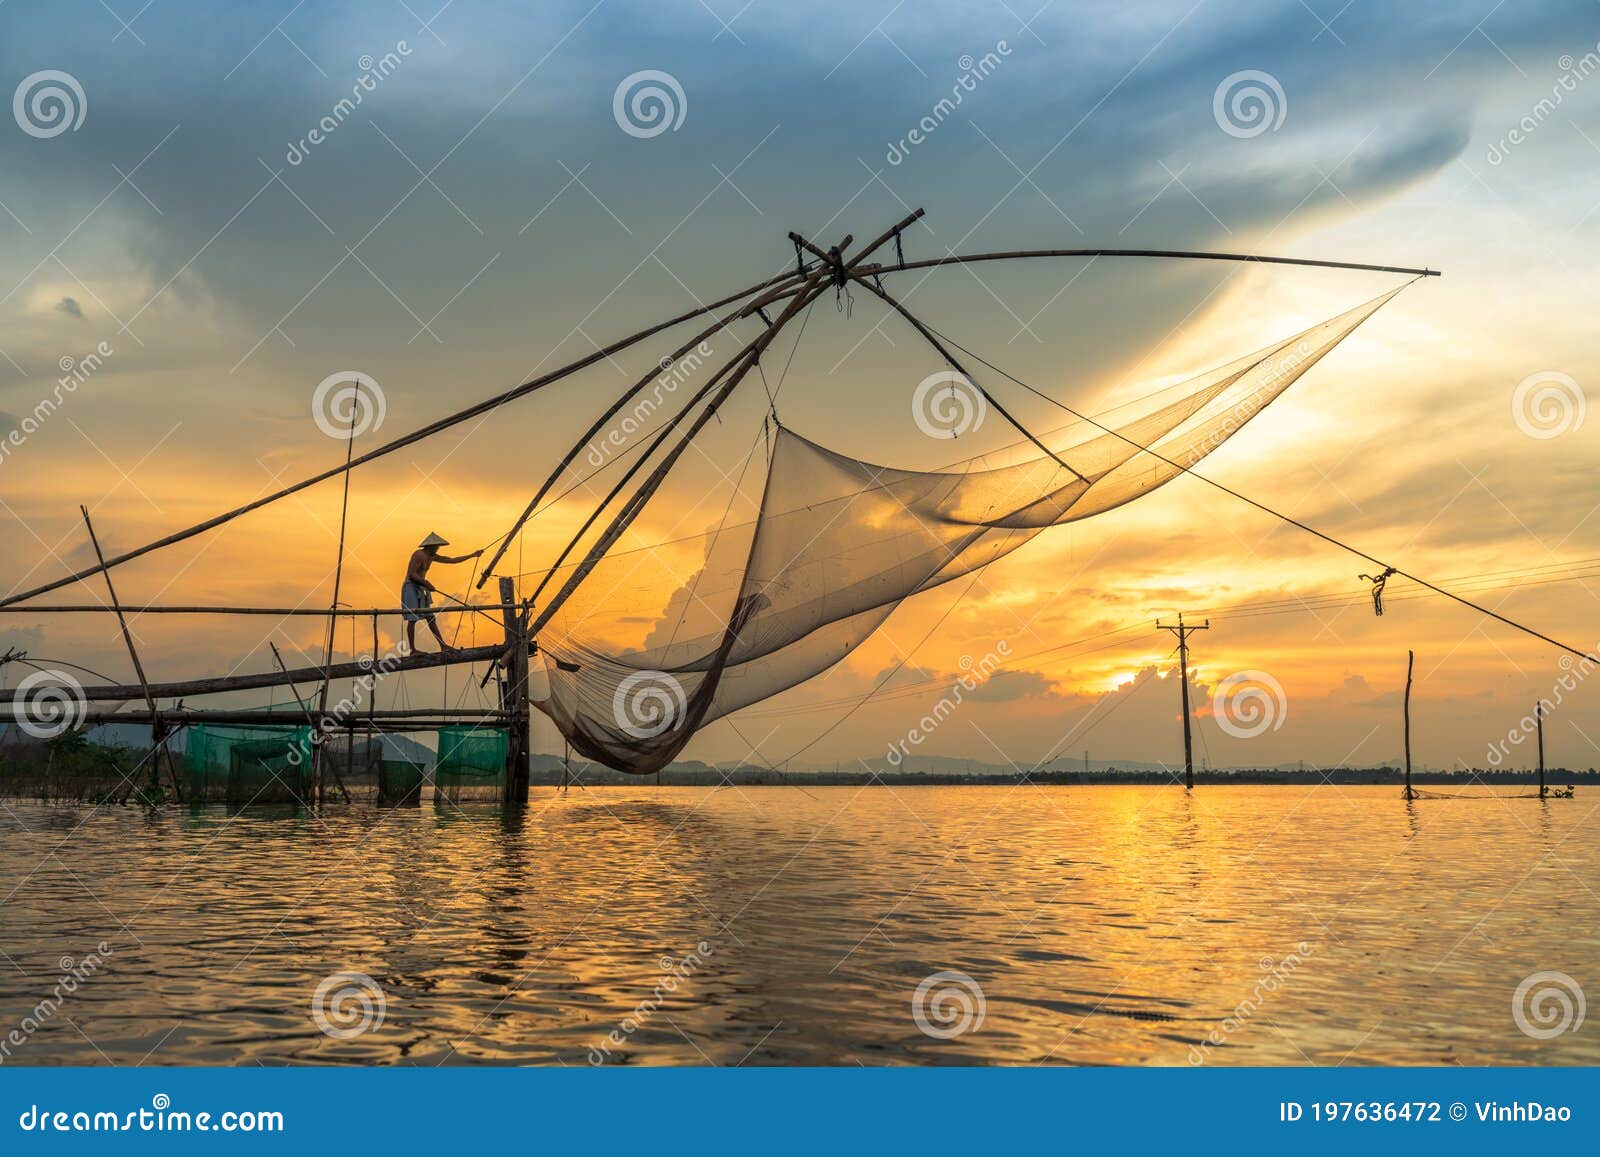 Mekong Delta Landscape with Big Fishing Net in Floating Water Season in  Chau Doc, an Giang Province, Mekong Delta, South Vietnam Stock Photo -  Image of rowing, countries: 197636472